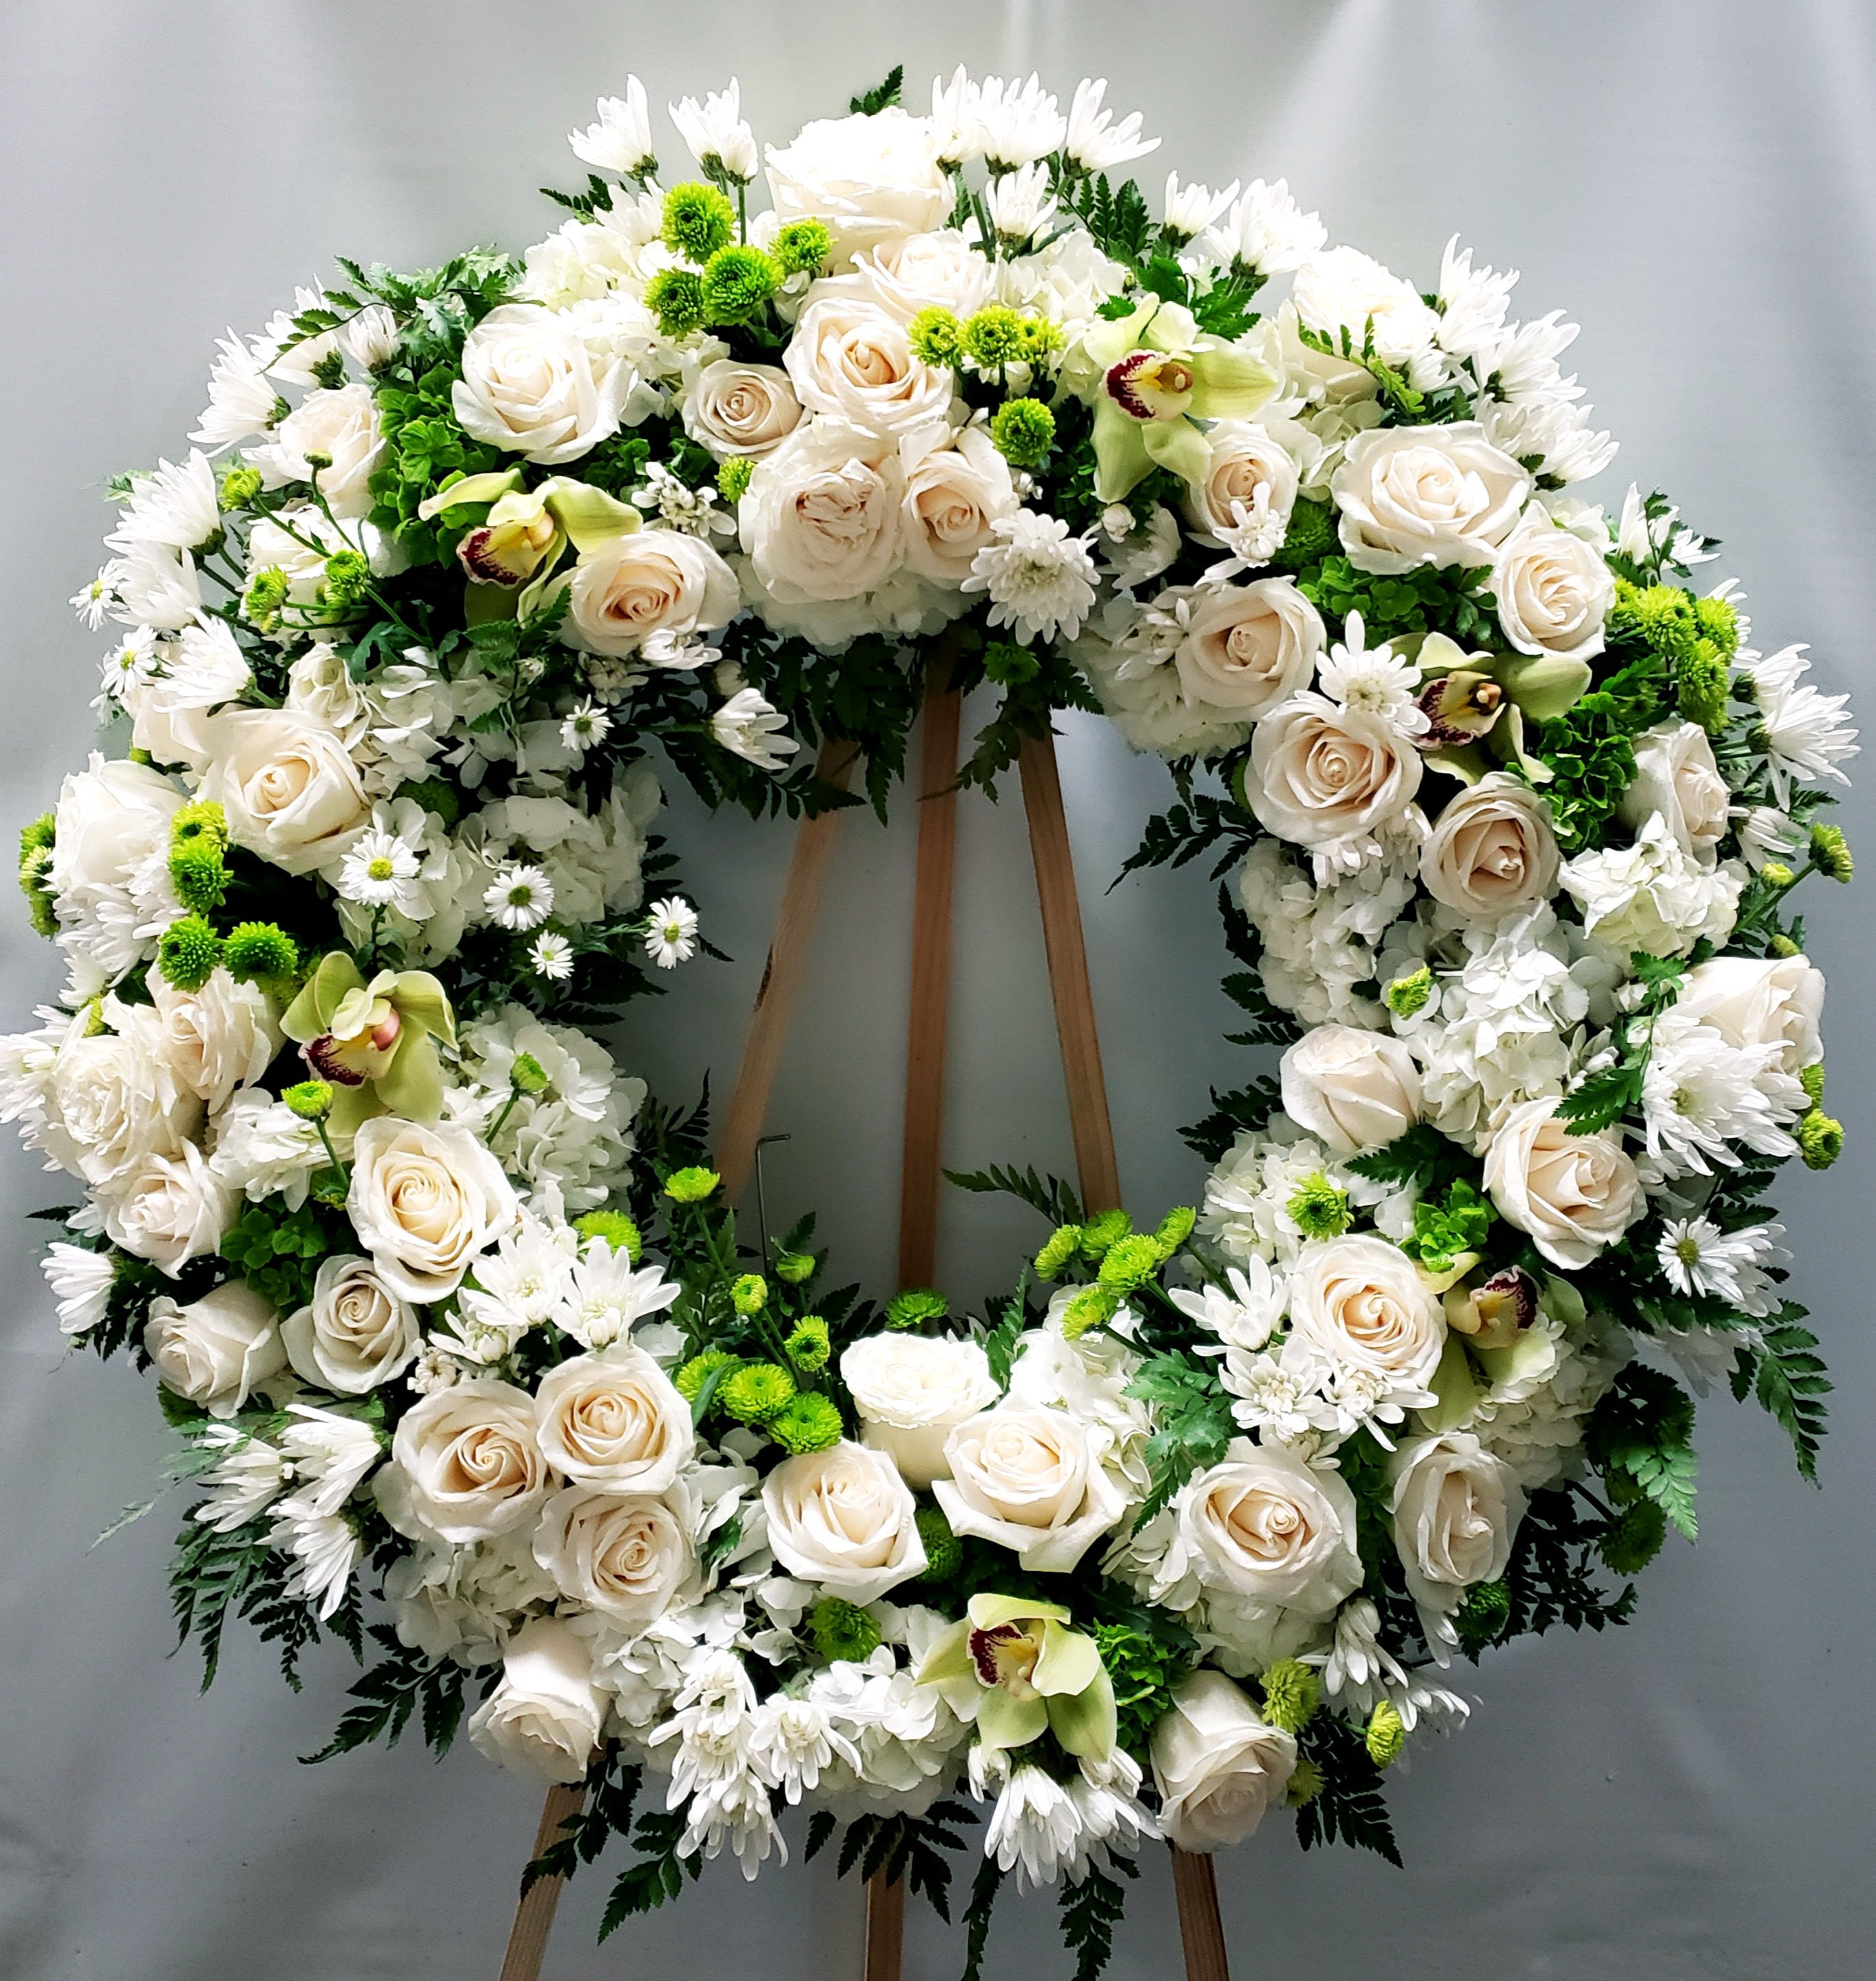 Green and White Wreath - 24in wide